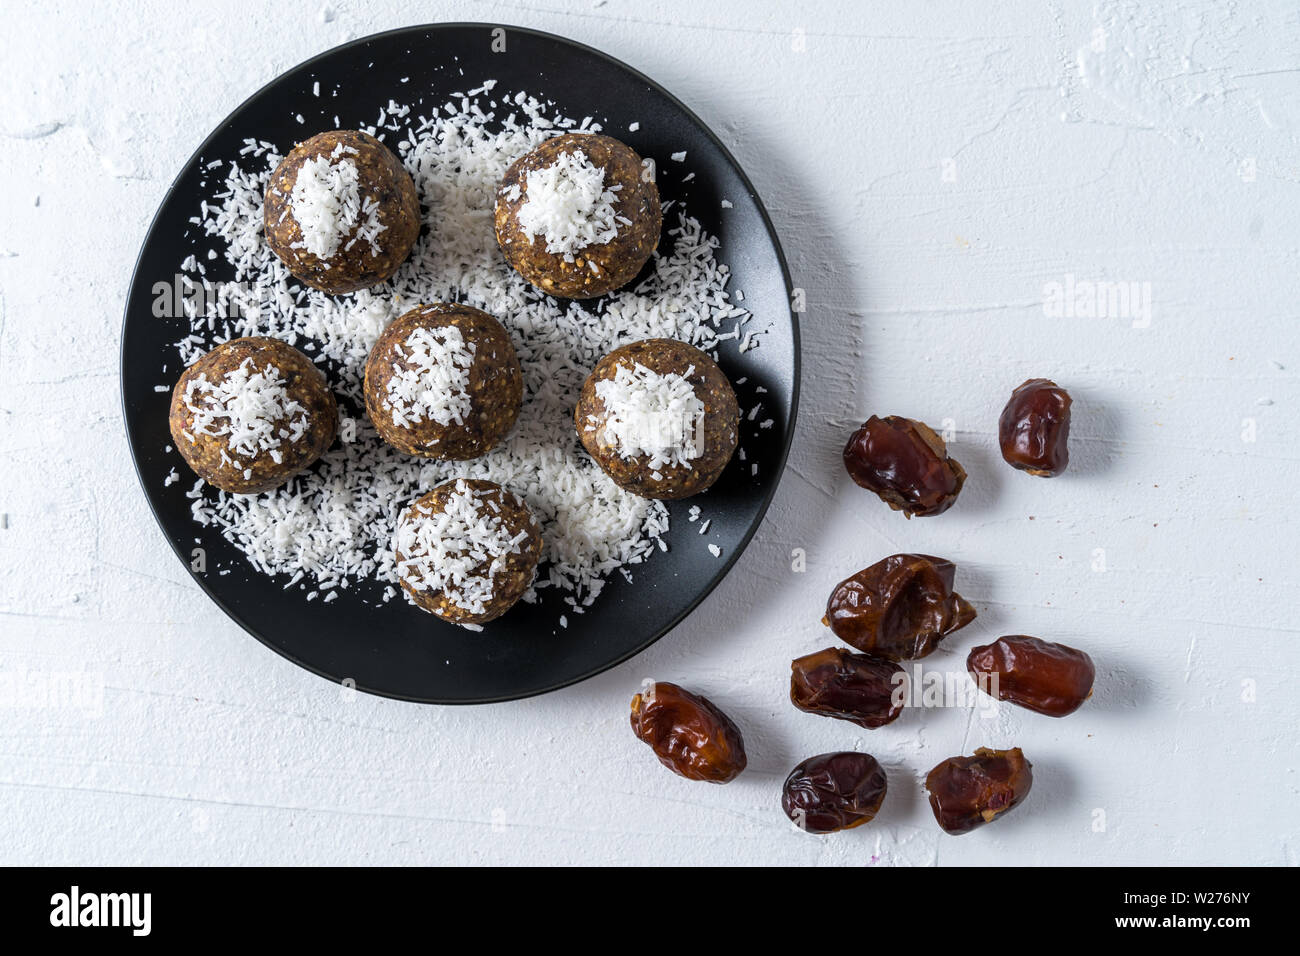 Healthy organic energy balls made with dates, prunes, raisins, peanut, with coconut shavings, in black plate on white background, flat lay. Stock Photo